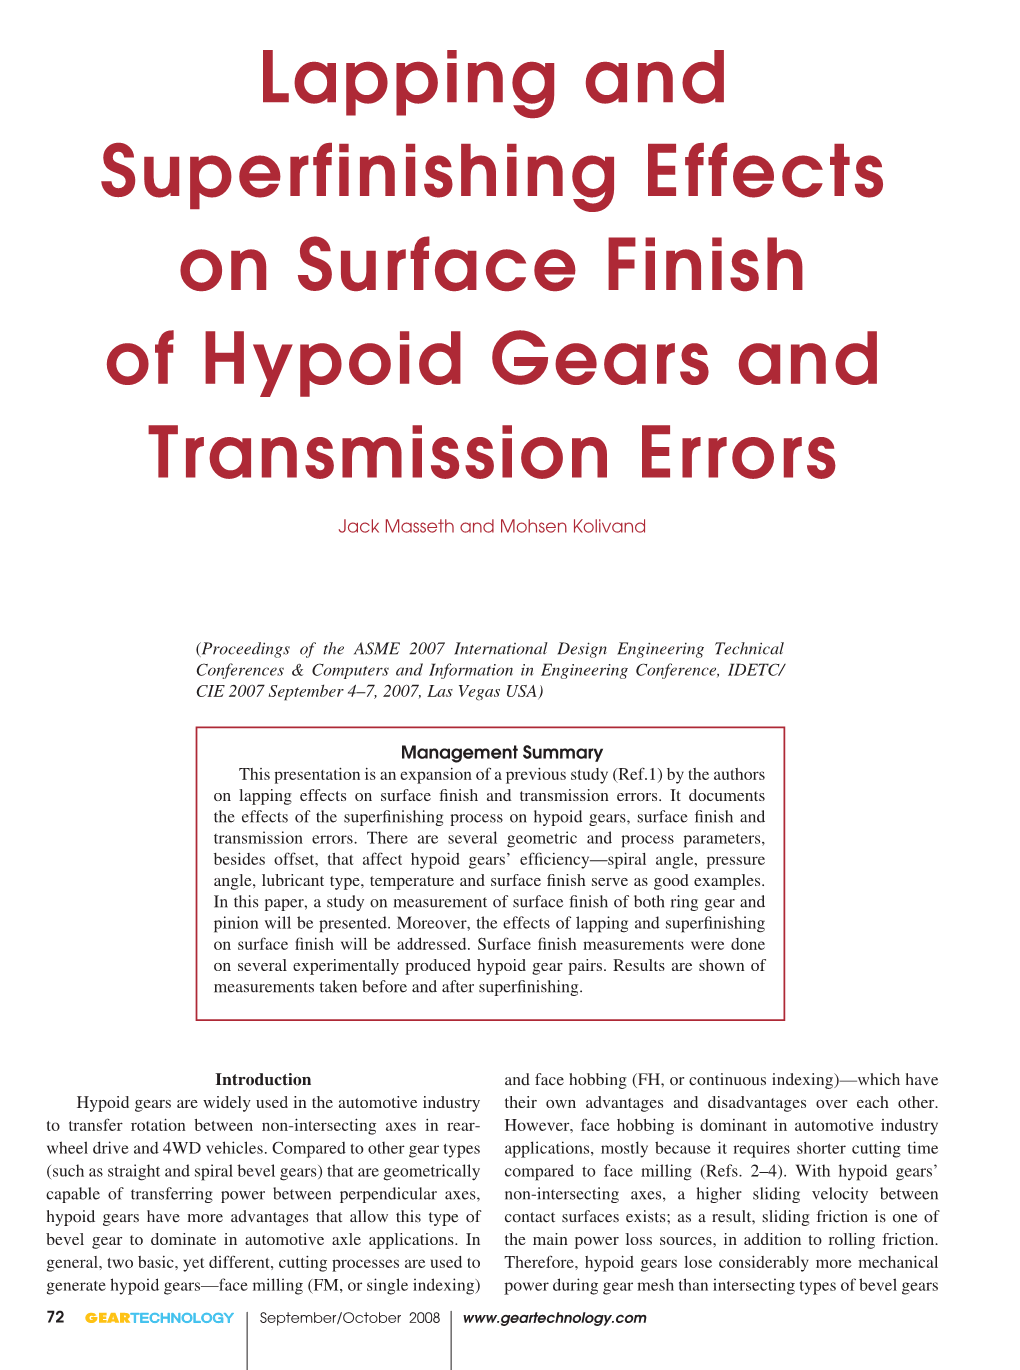 Lapping and Superfinishing Effects on Surface Finish of Hypoid Gears and Transmission Errors